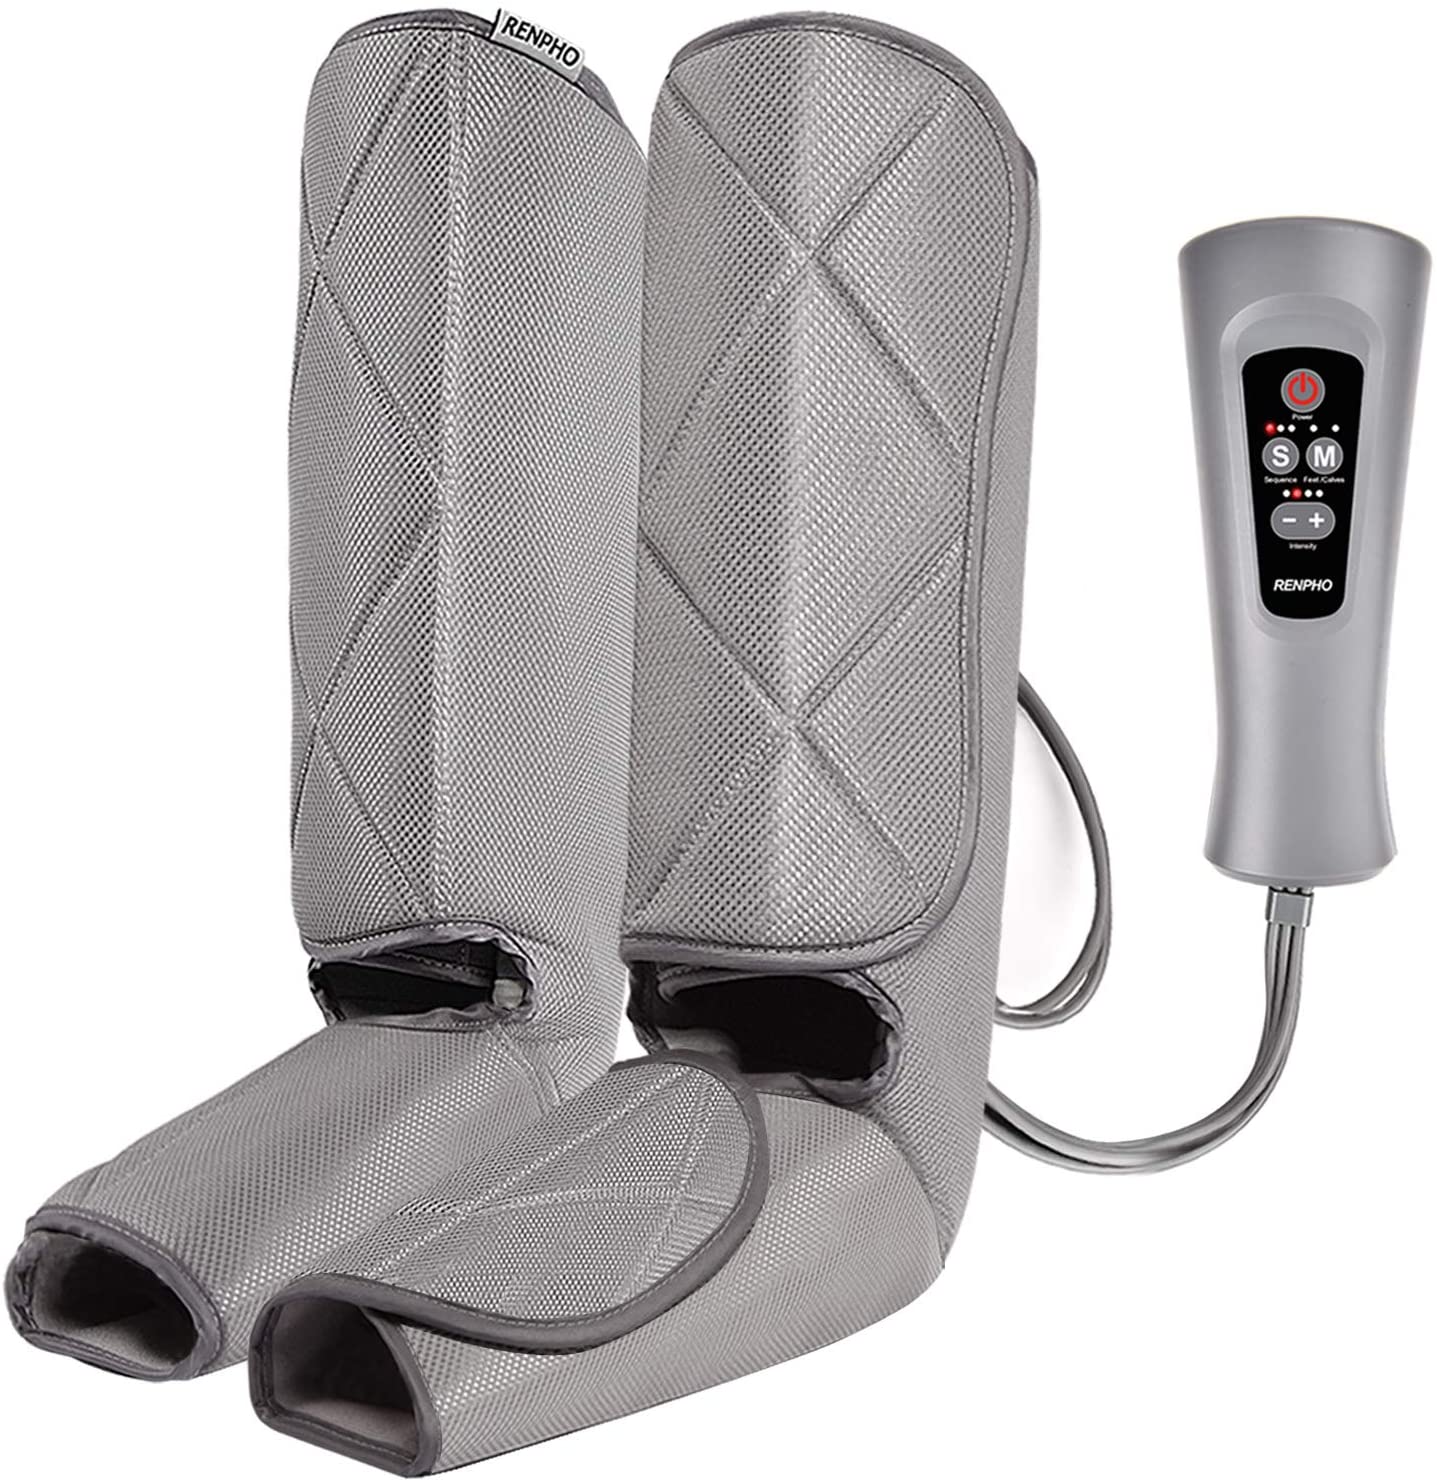 Renpho Leg Massager For Circulation And Relaxation Foot And Calf Massager Machine With Handheld